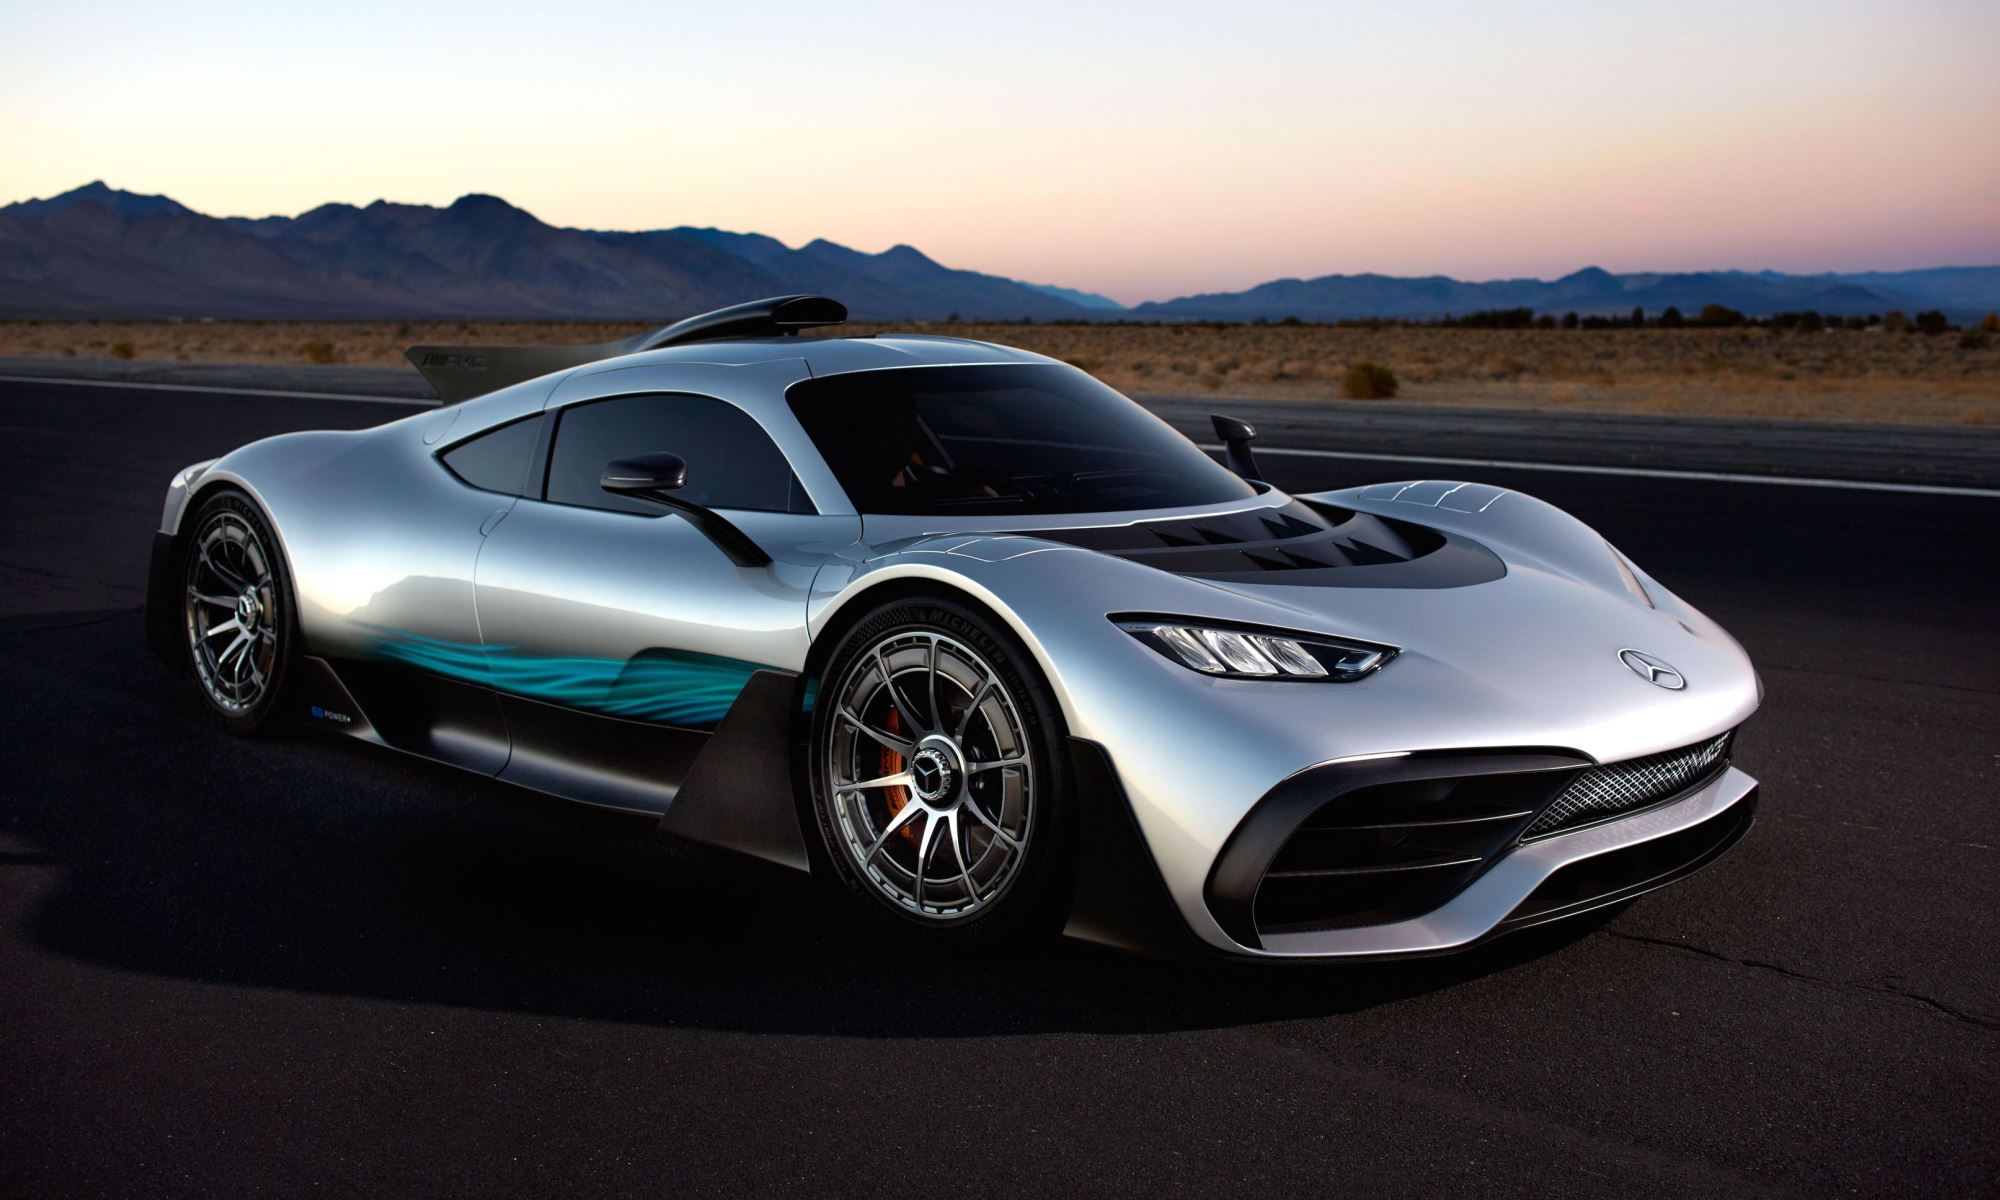 Mercedes-AMG One production delayed until 2020